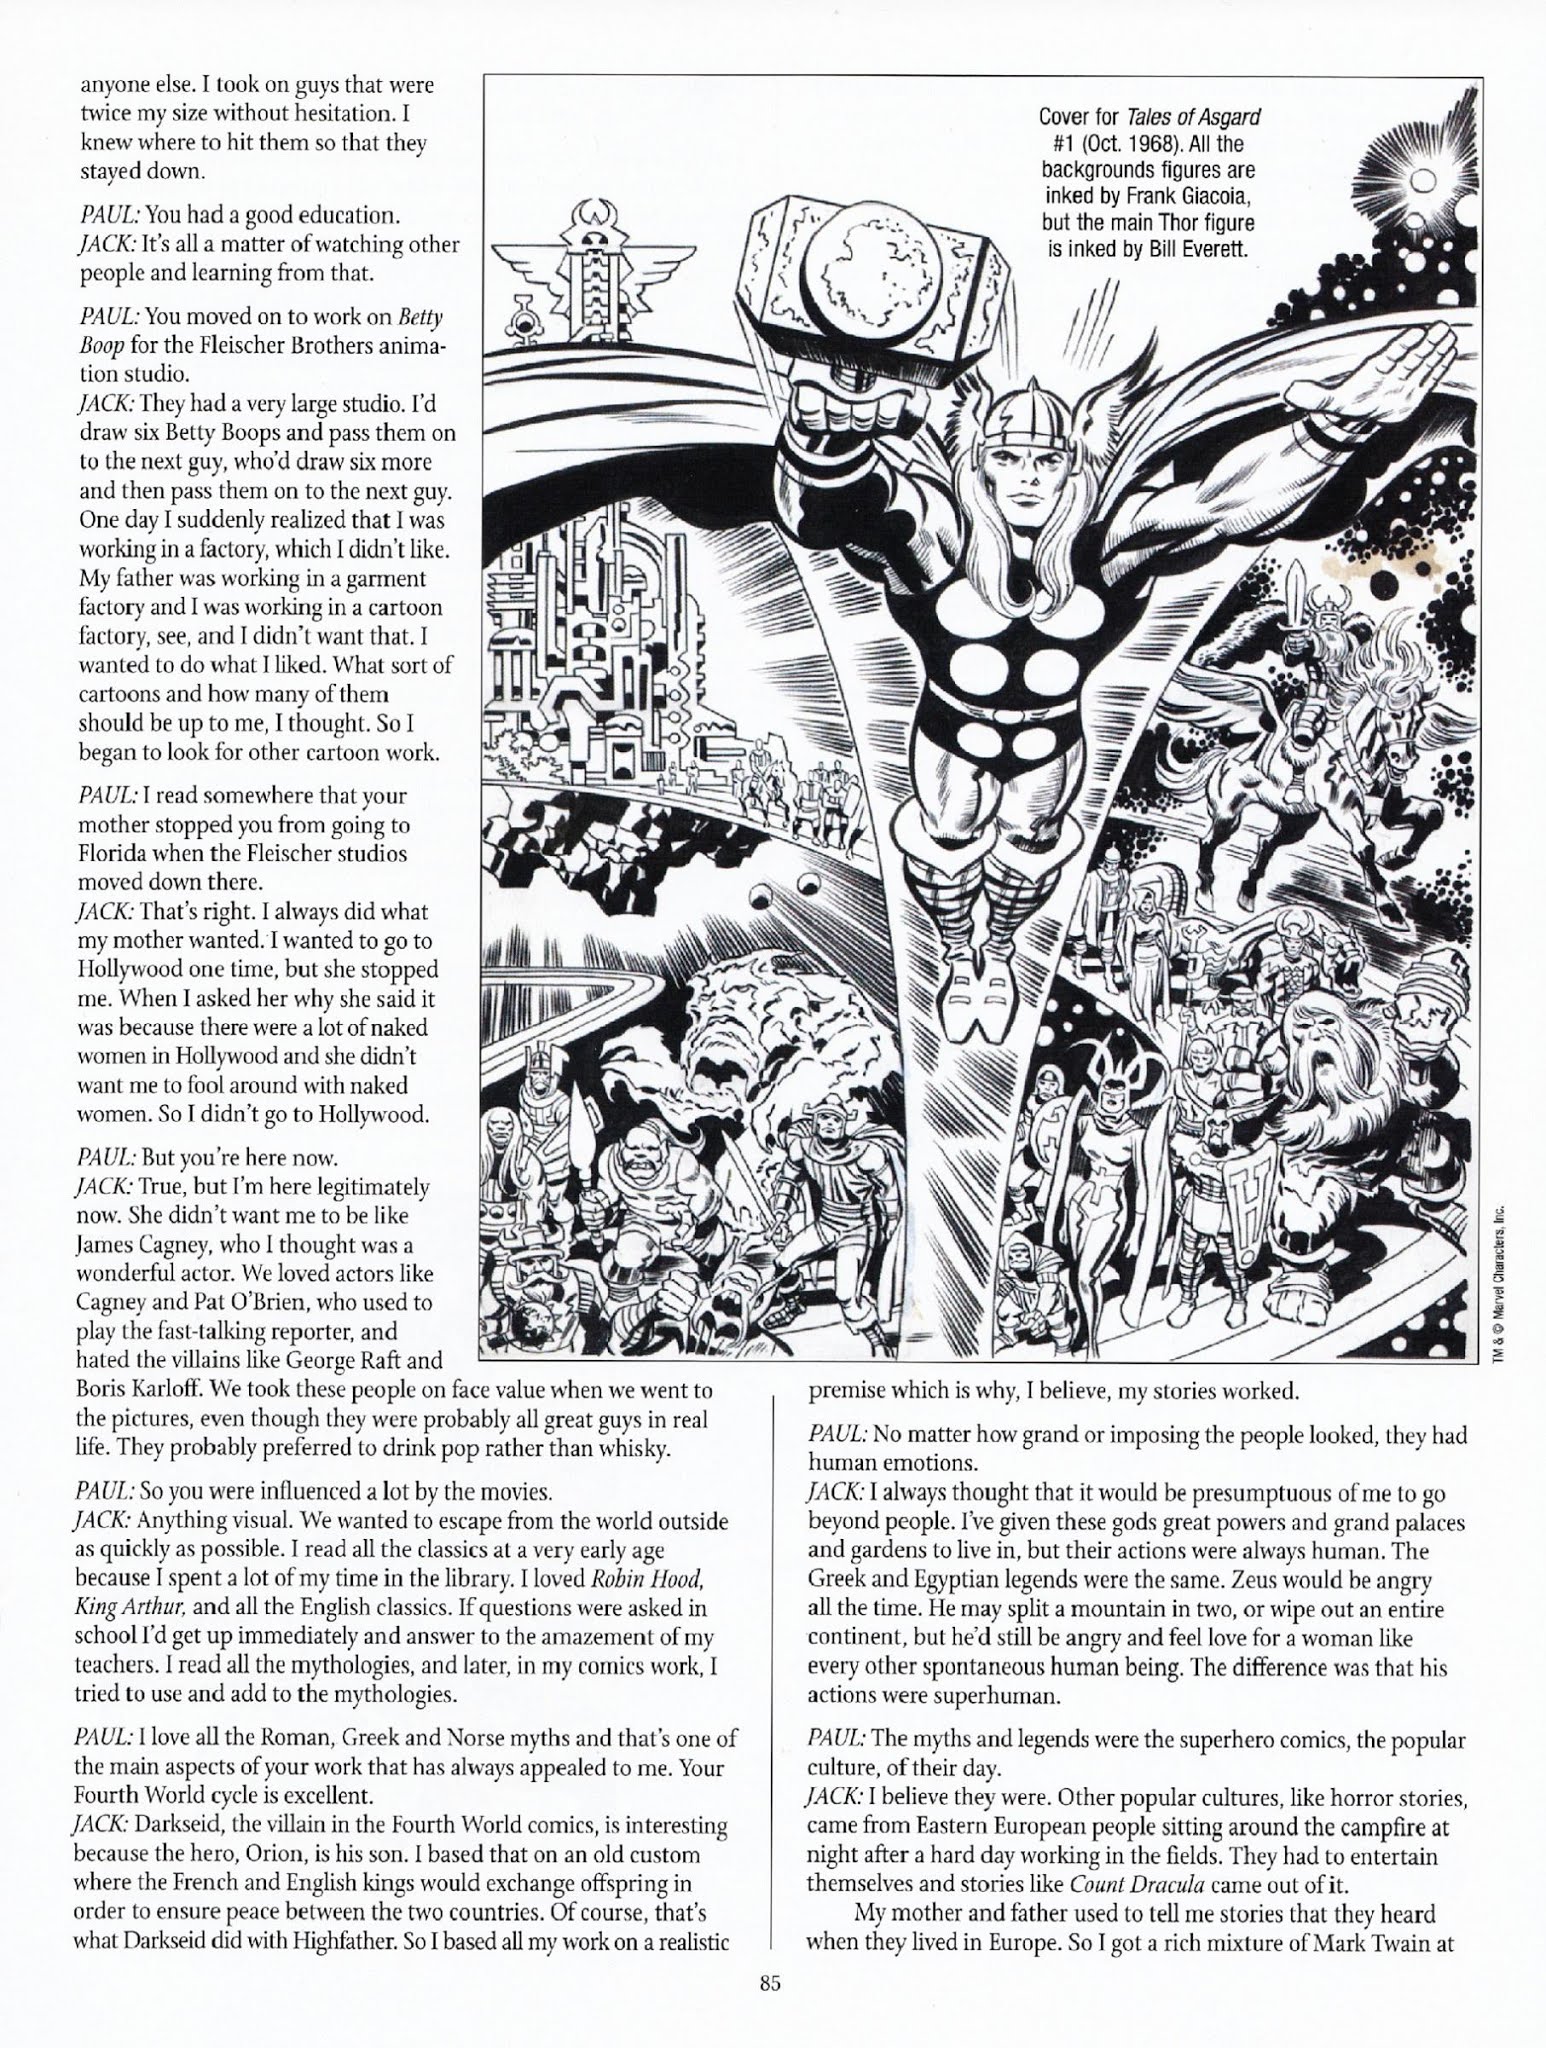 Read online The Jack Kirby Collector comic -  Issue #61 - 84